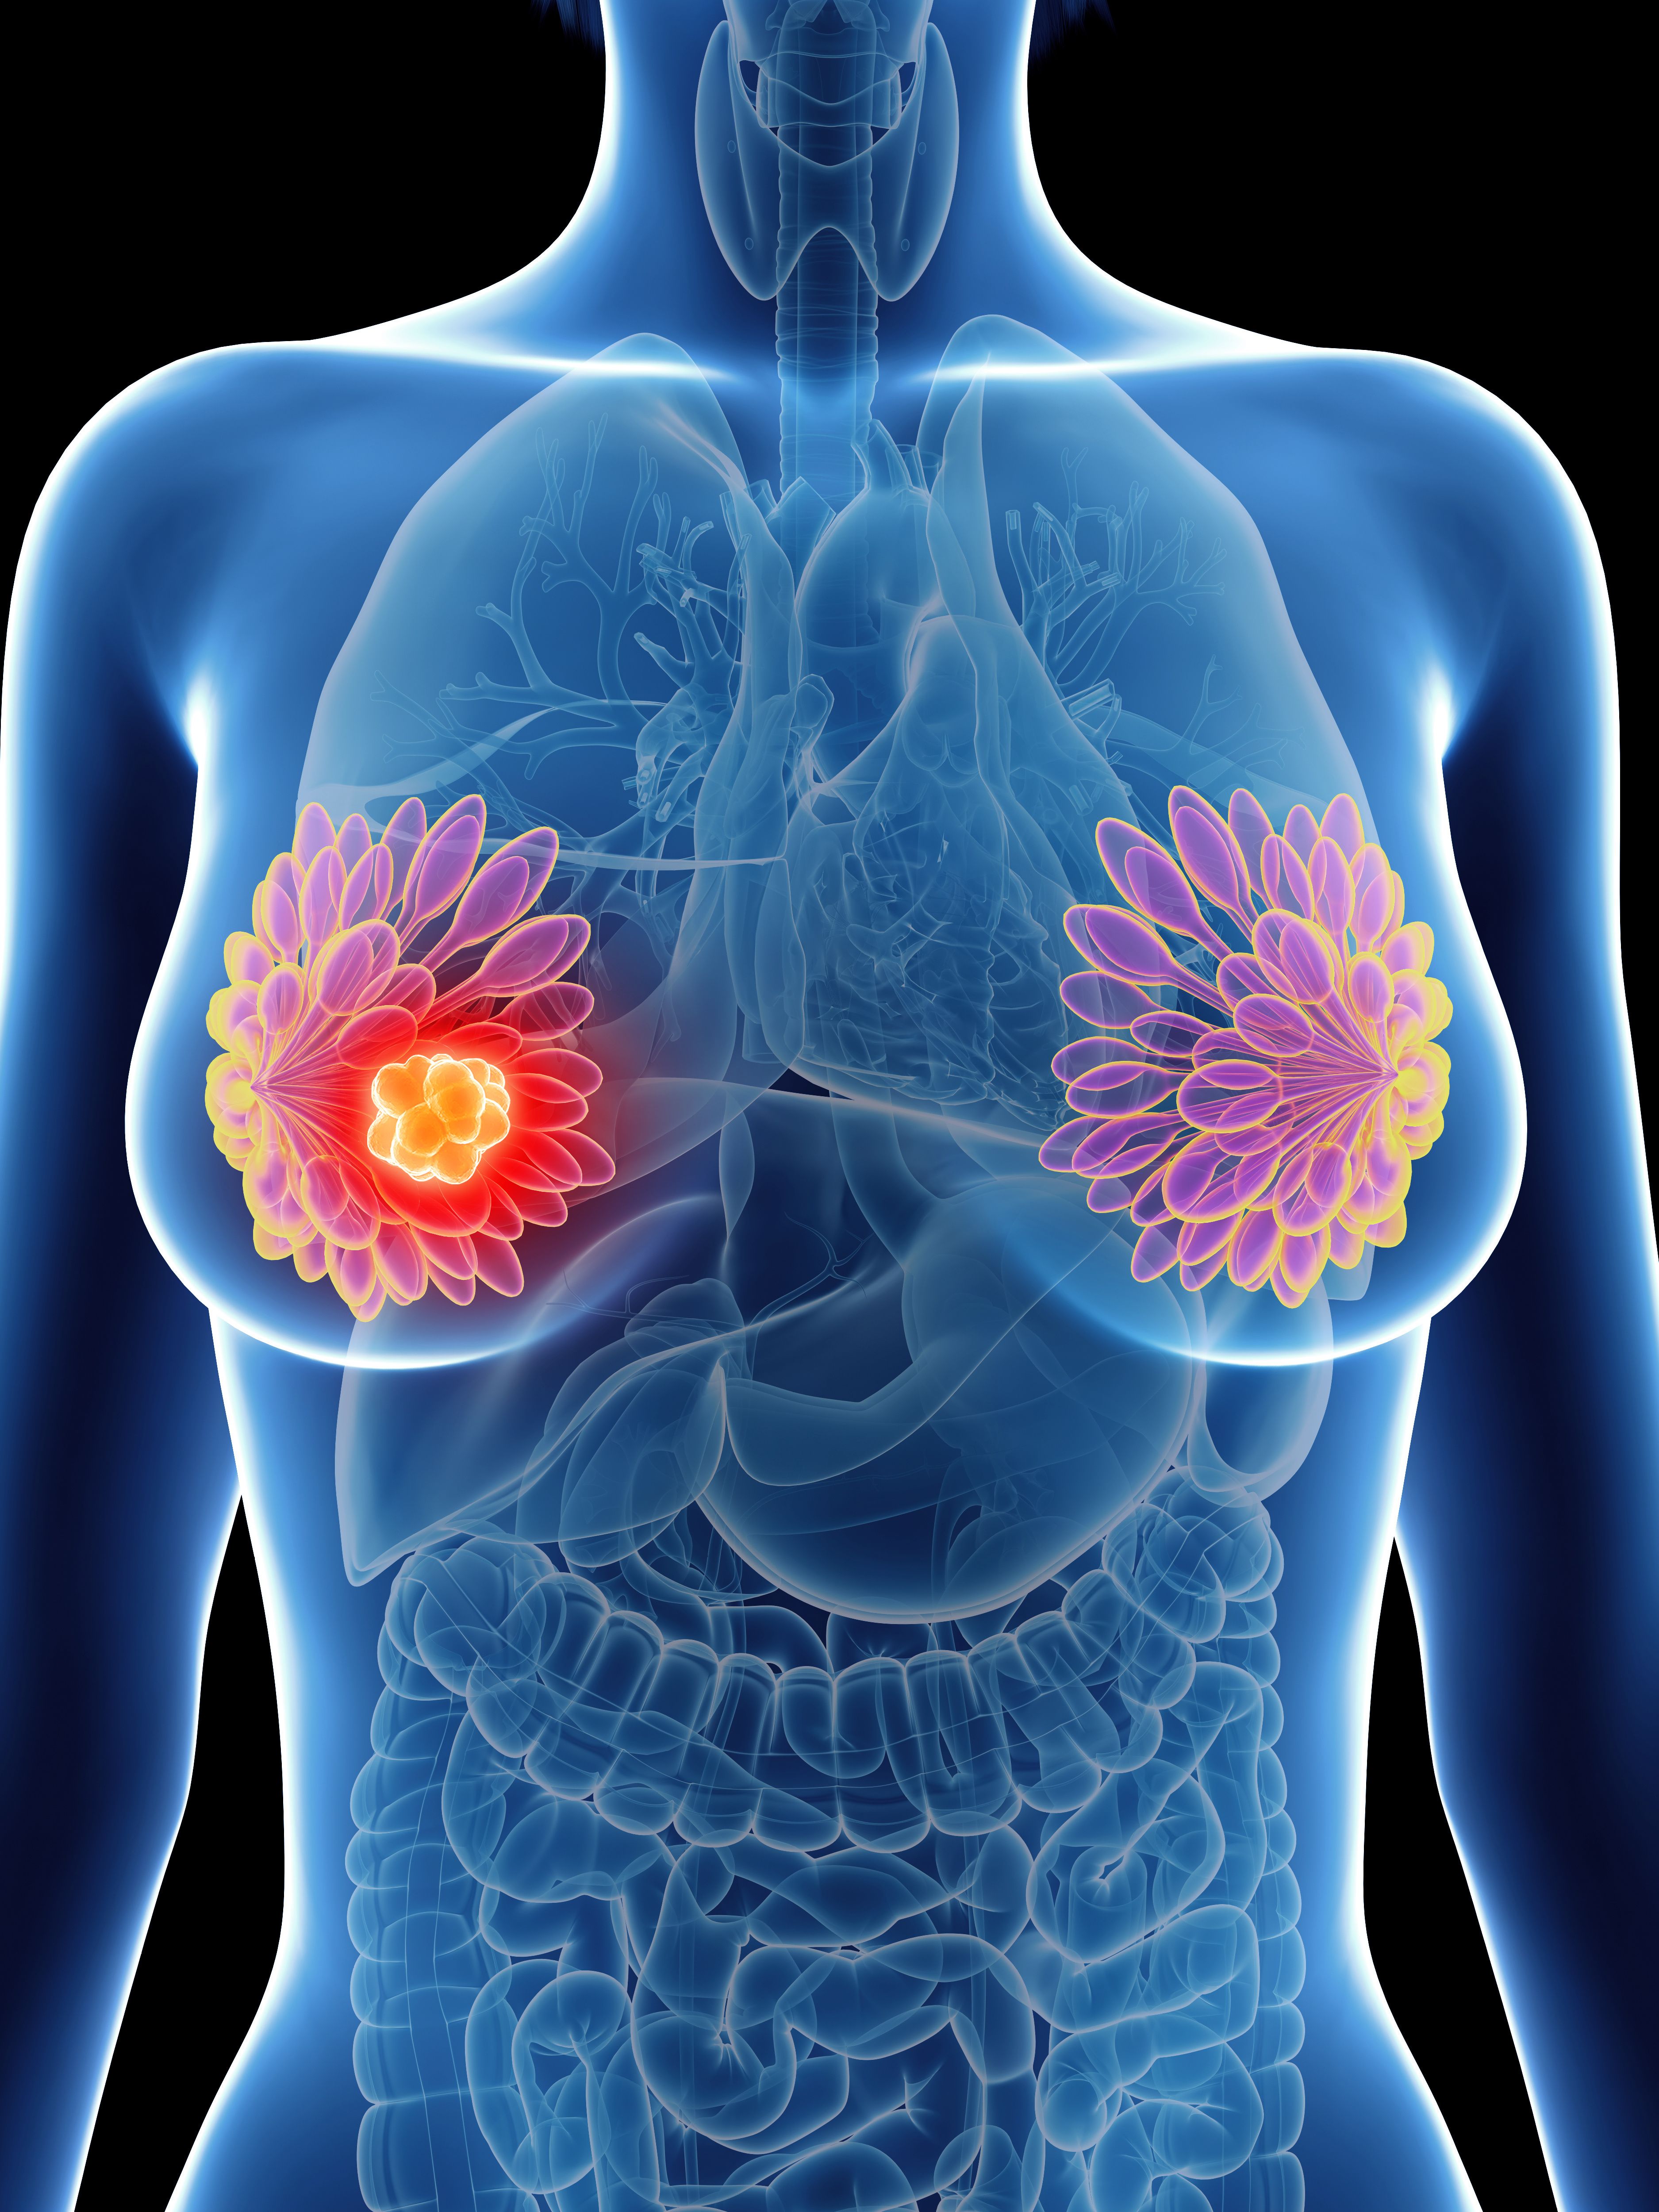 T-DXd Yields Consistent Results in HER2-Low Advanced Breast Cancer - Cancer Network